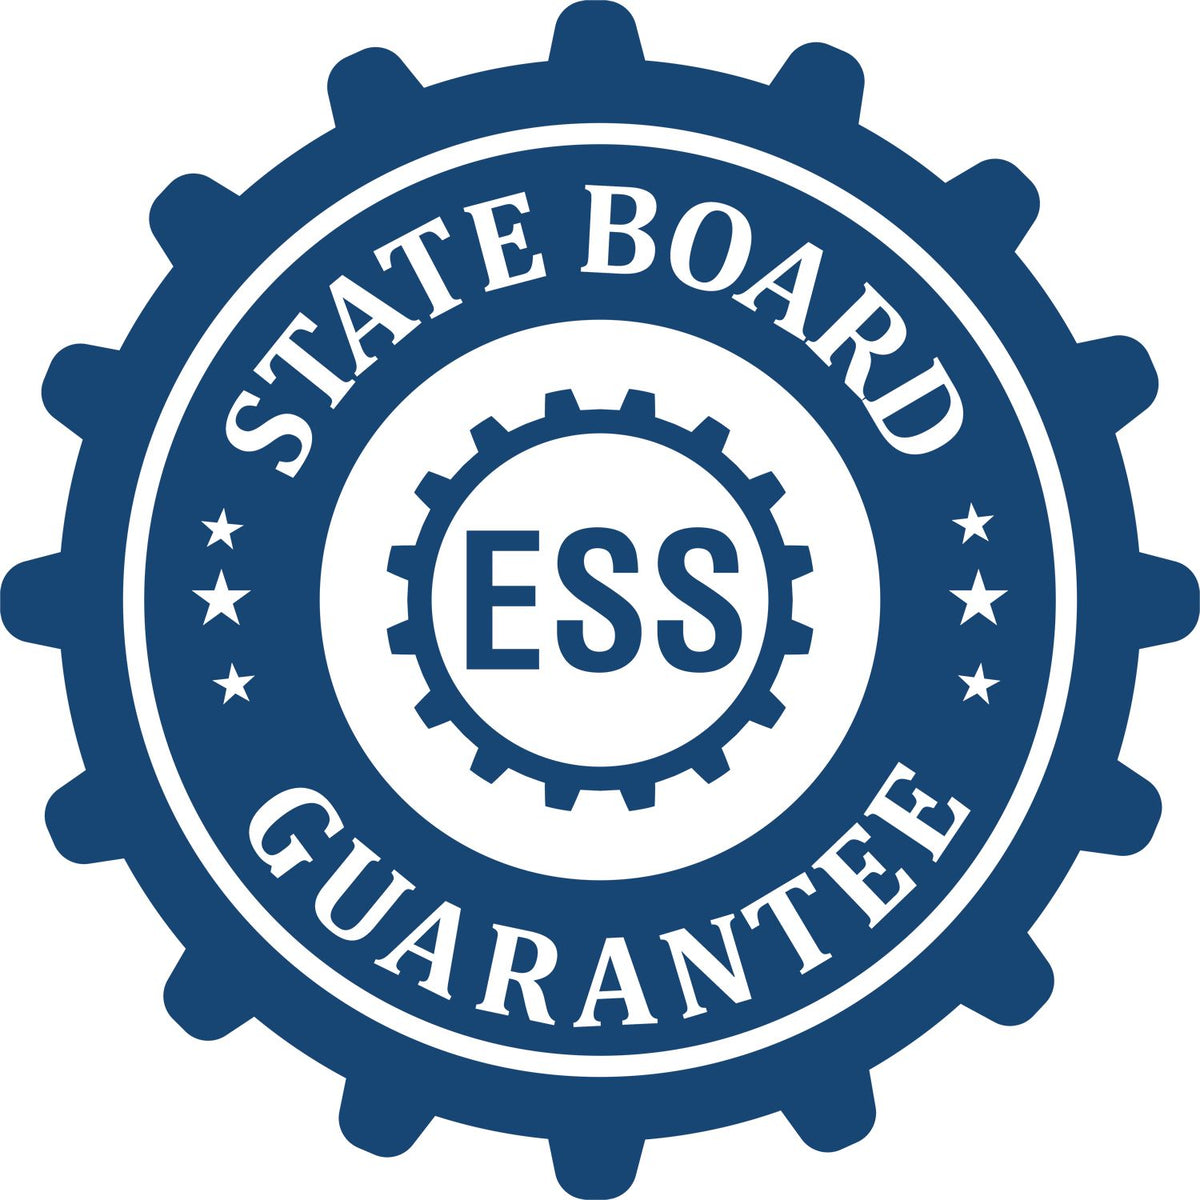 An emblem in a gear shape illustrating a state board guarantee for the Hybrid North Carolina Landscape Architect Seal